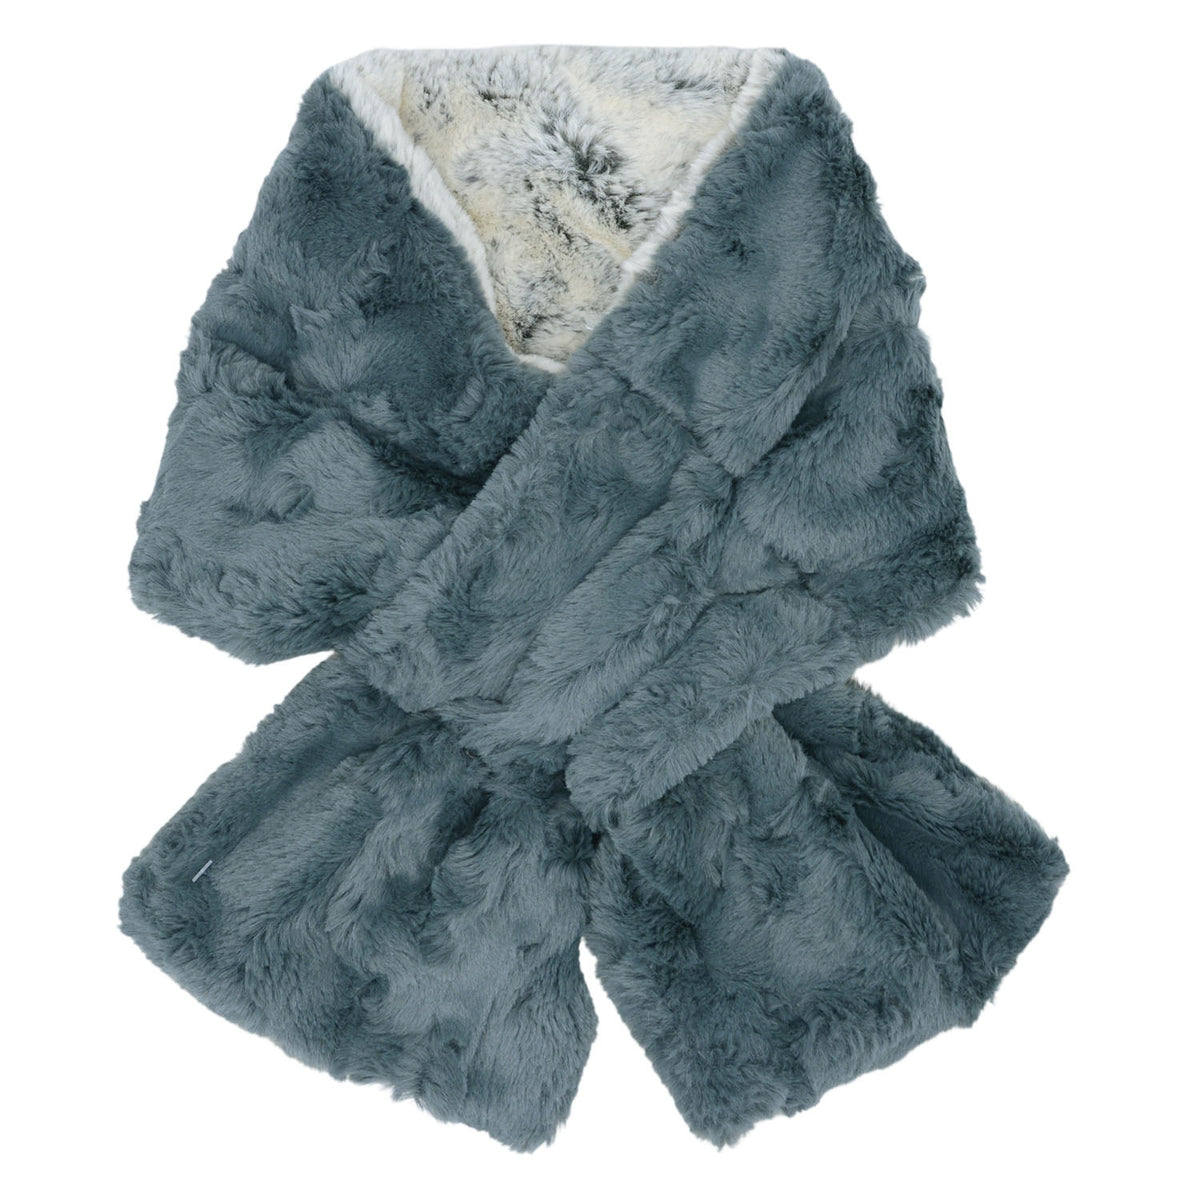 Pull-Thru Scarf | Frosted Juniper Faux Fur reverse to Slate | Handmade USA by Pandemonium Seattle